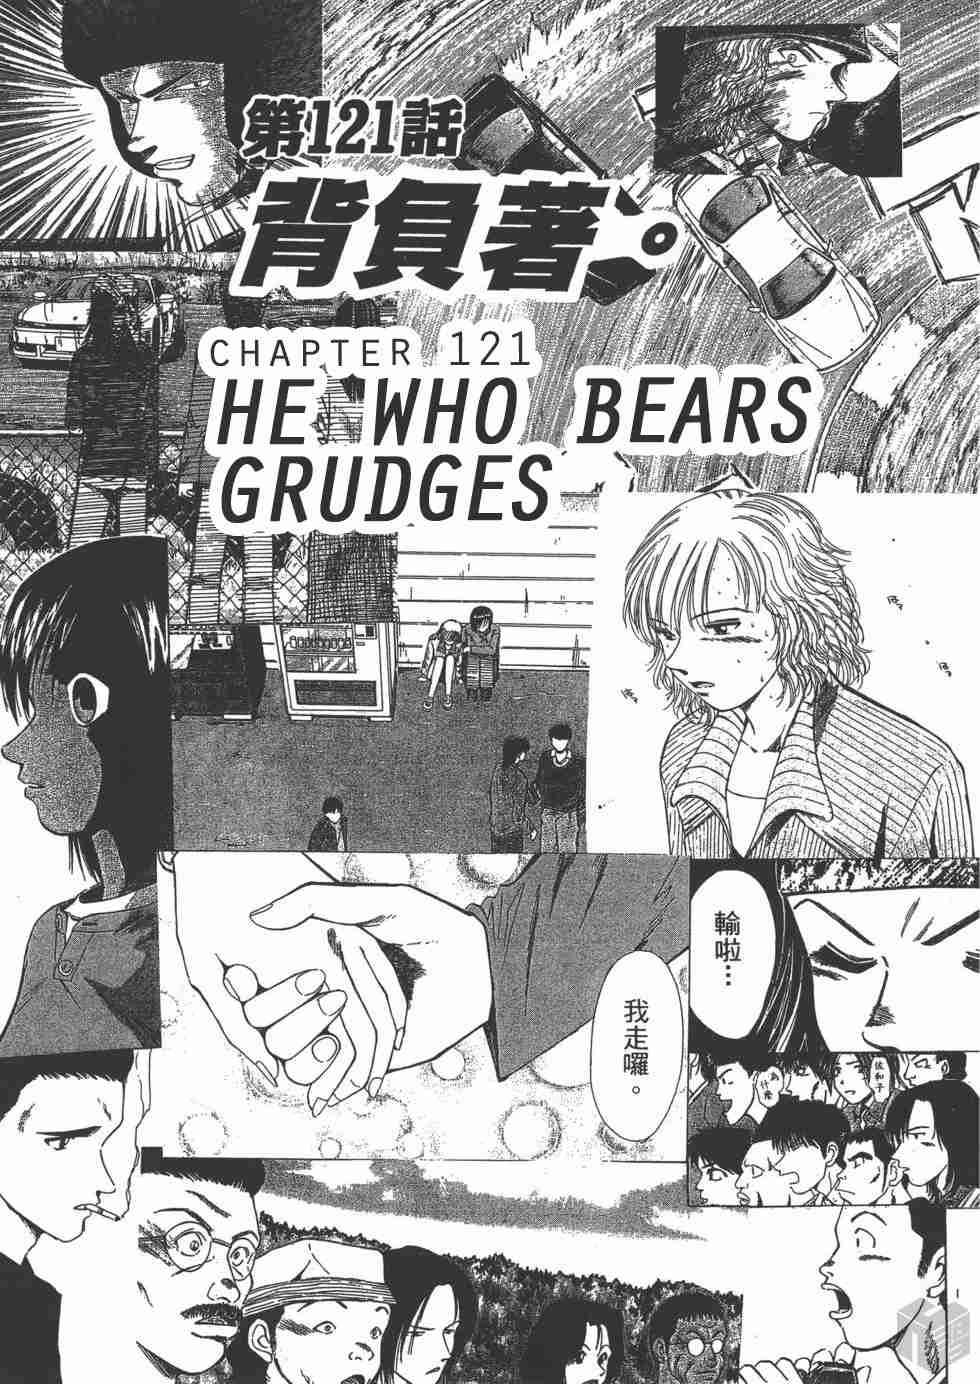 Over Rev! Vol. 11 Ch. 121 He who Bears Grudges